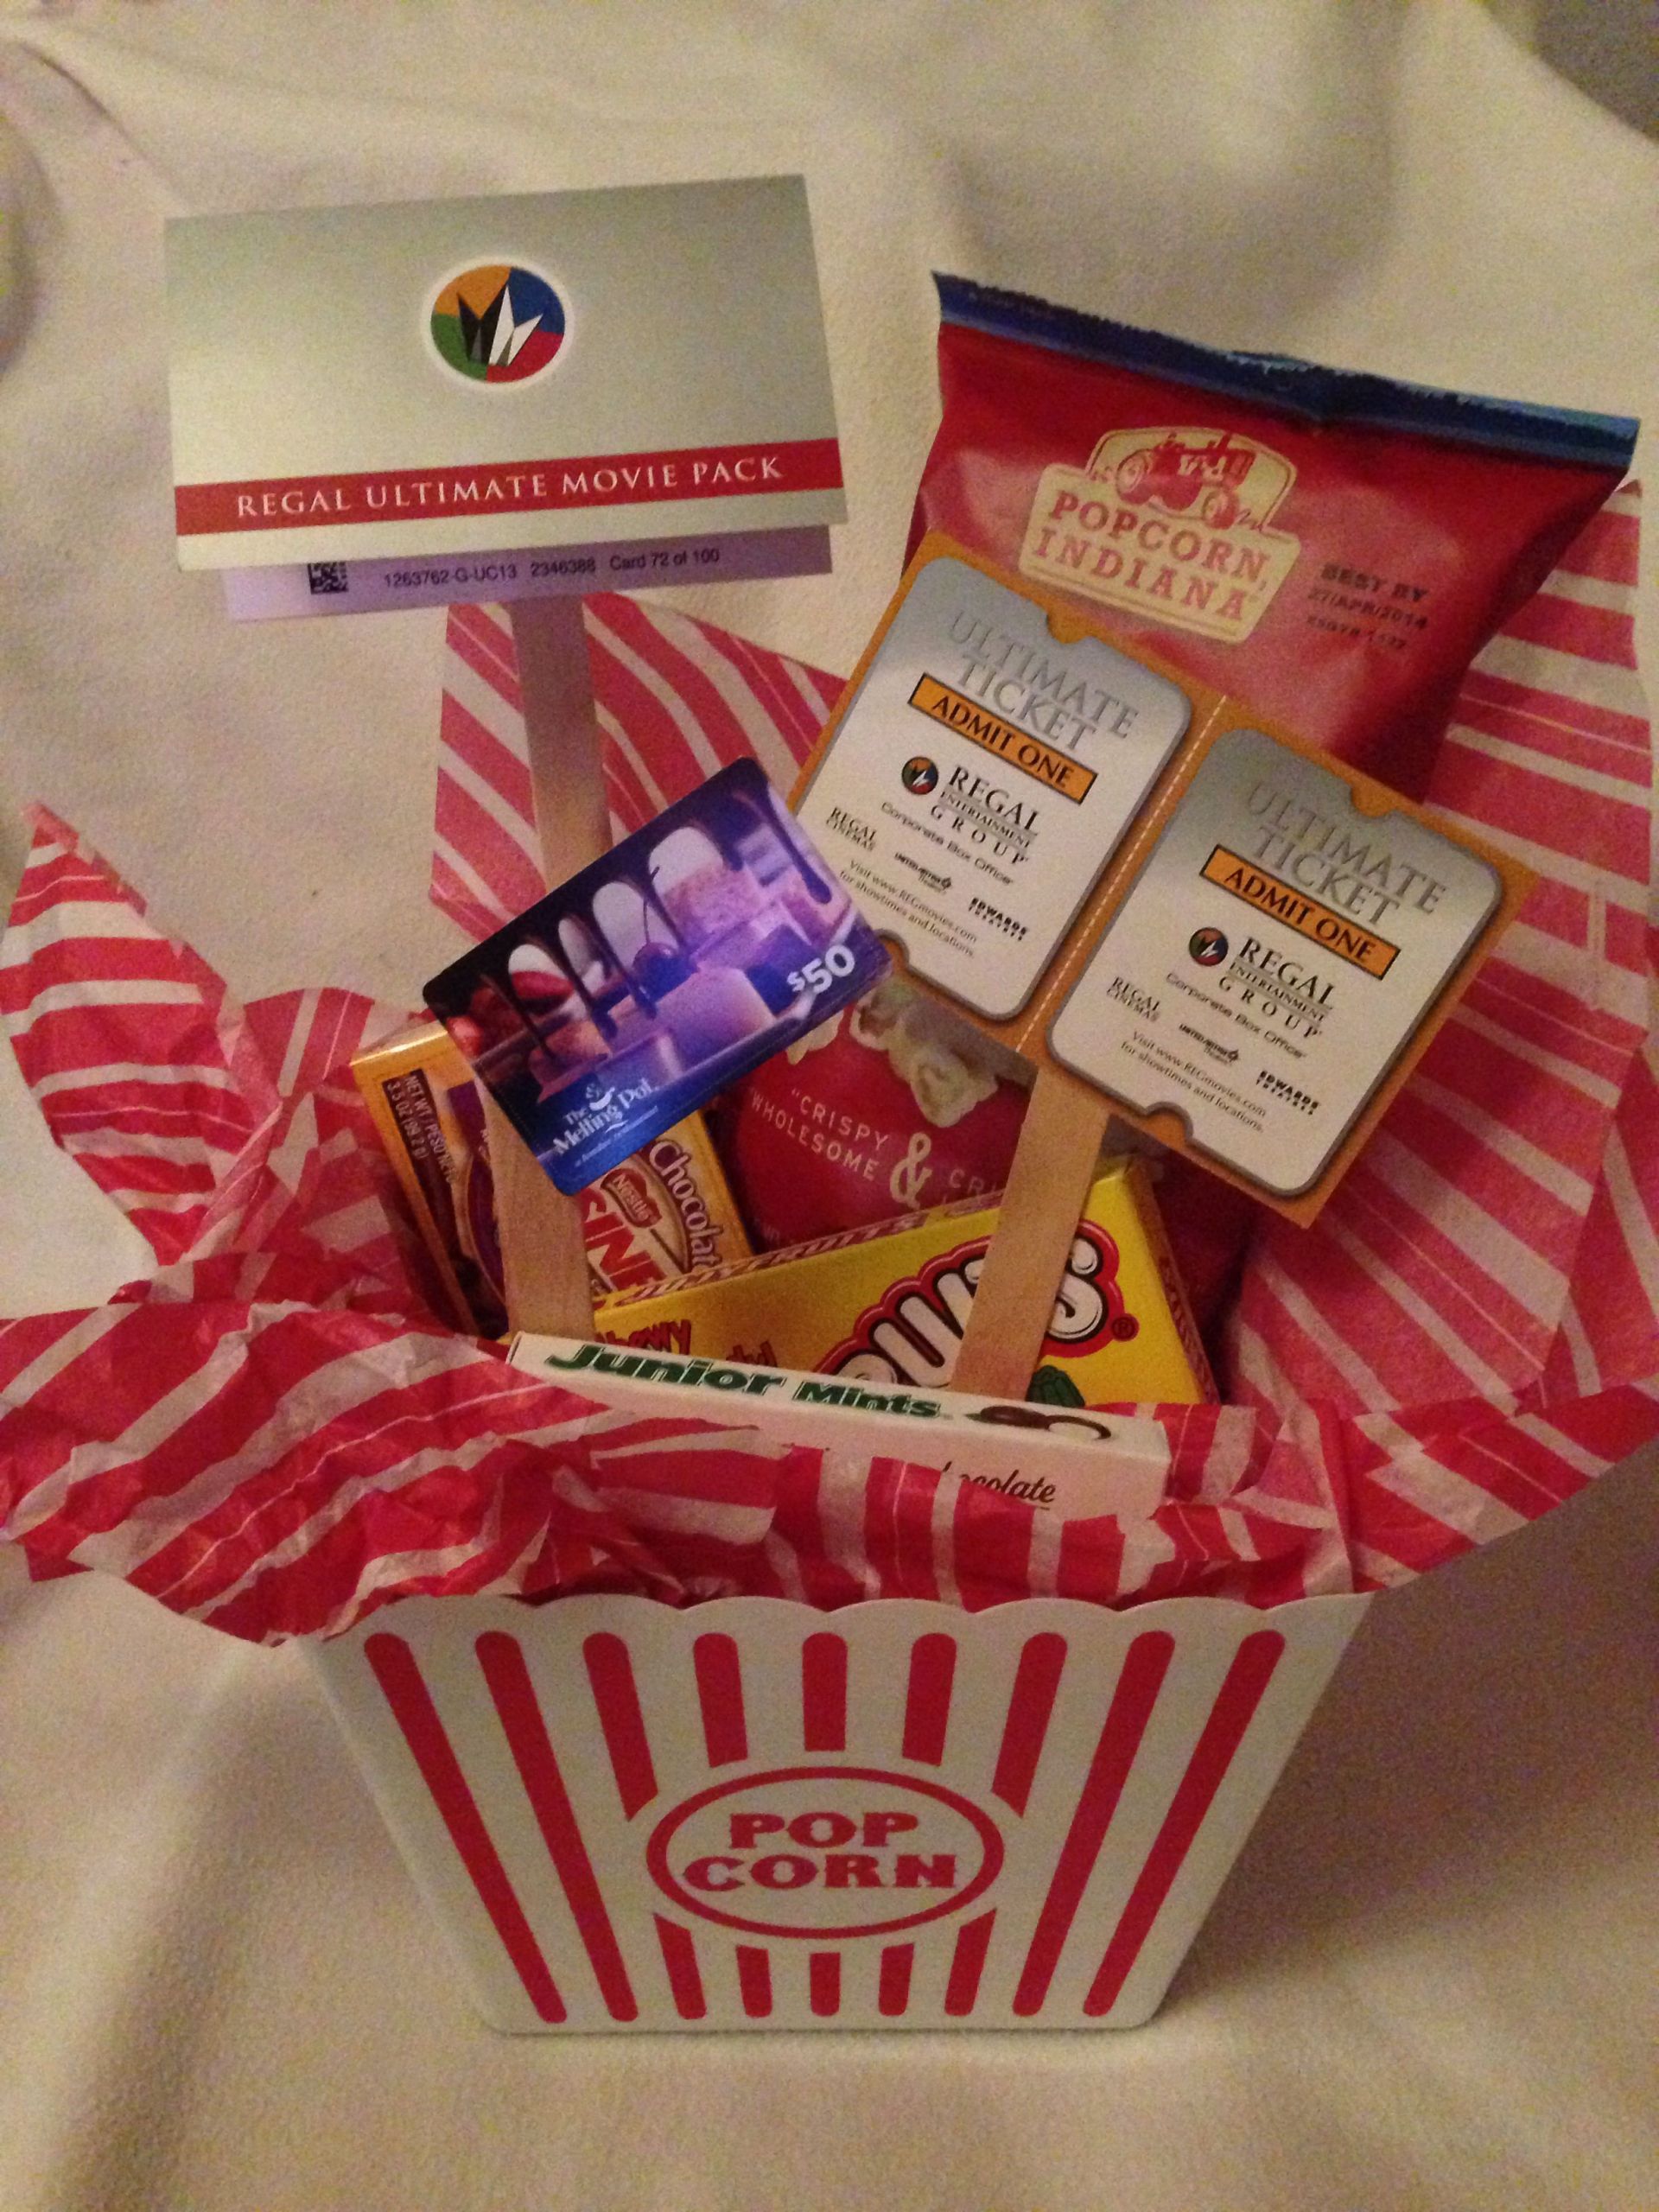 Dinner And A Movie Gift Basket Ideas
 Dinner & a movie Gift Movie theater snacks bag of